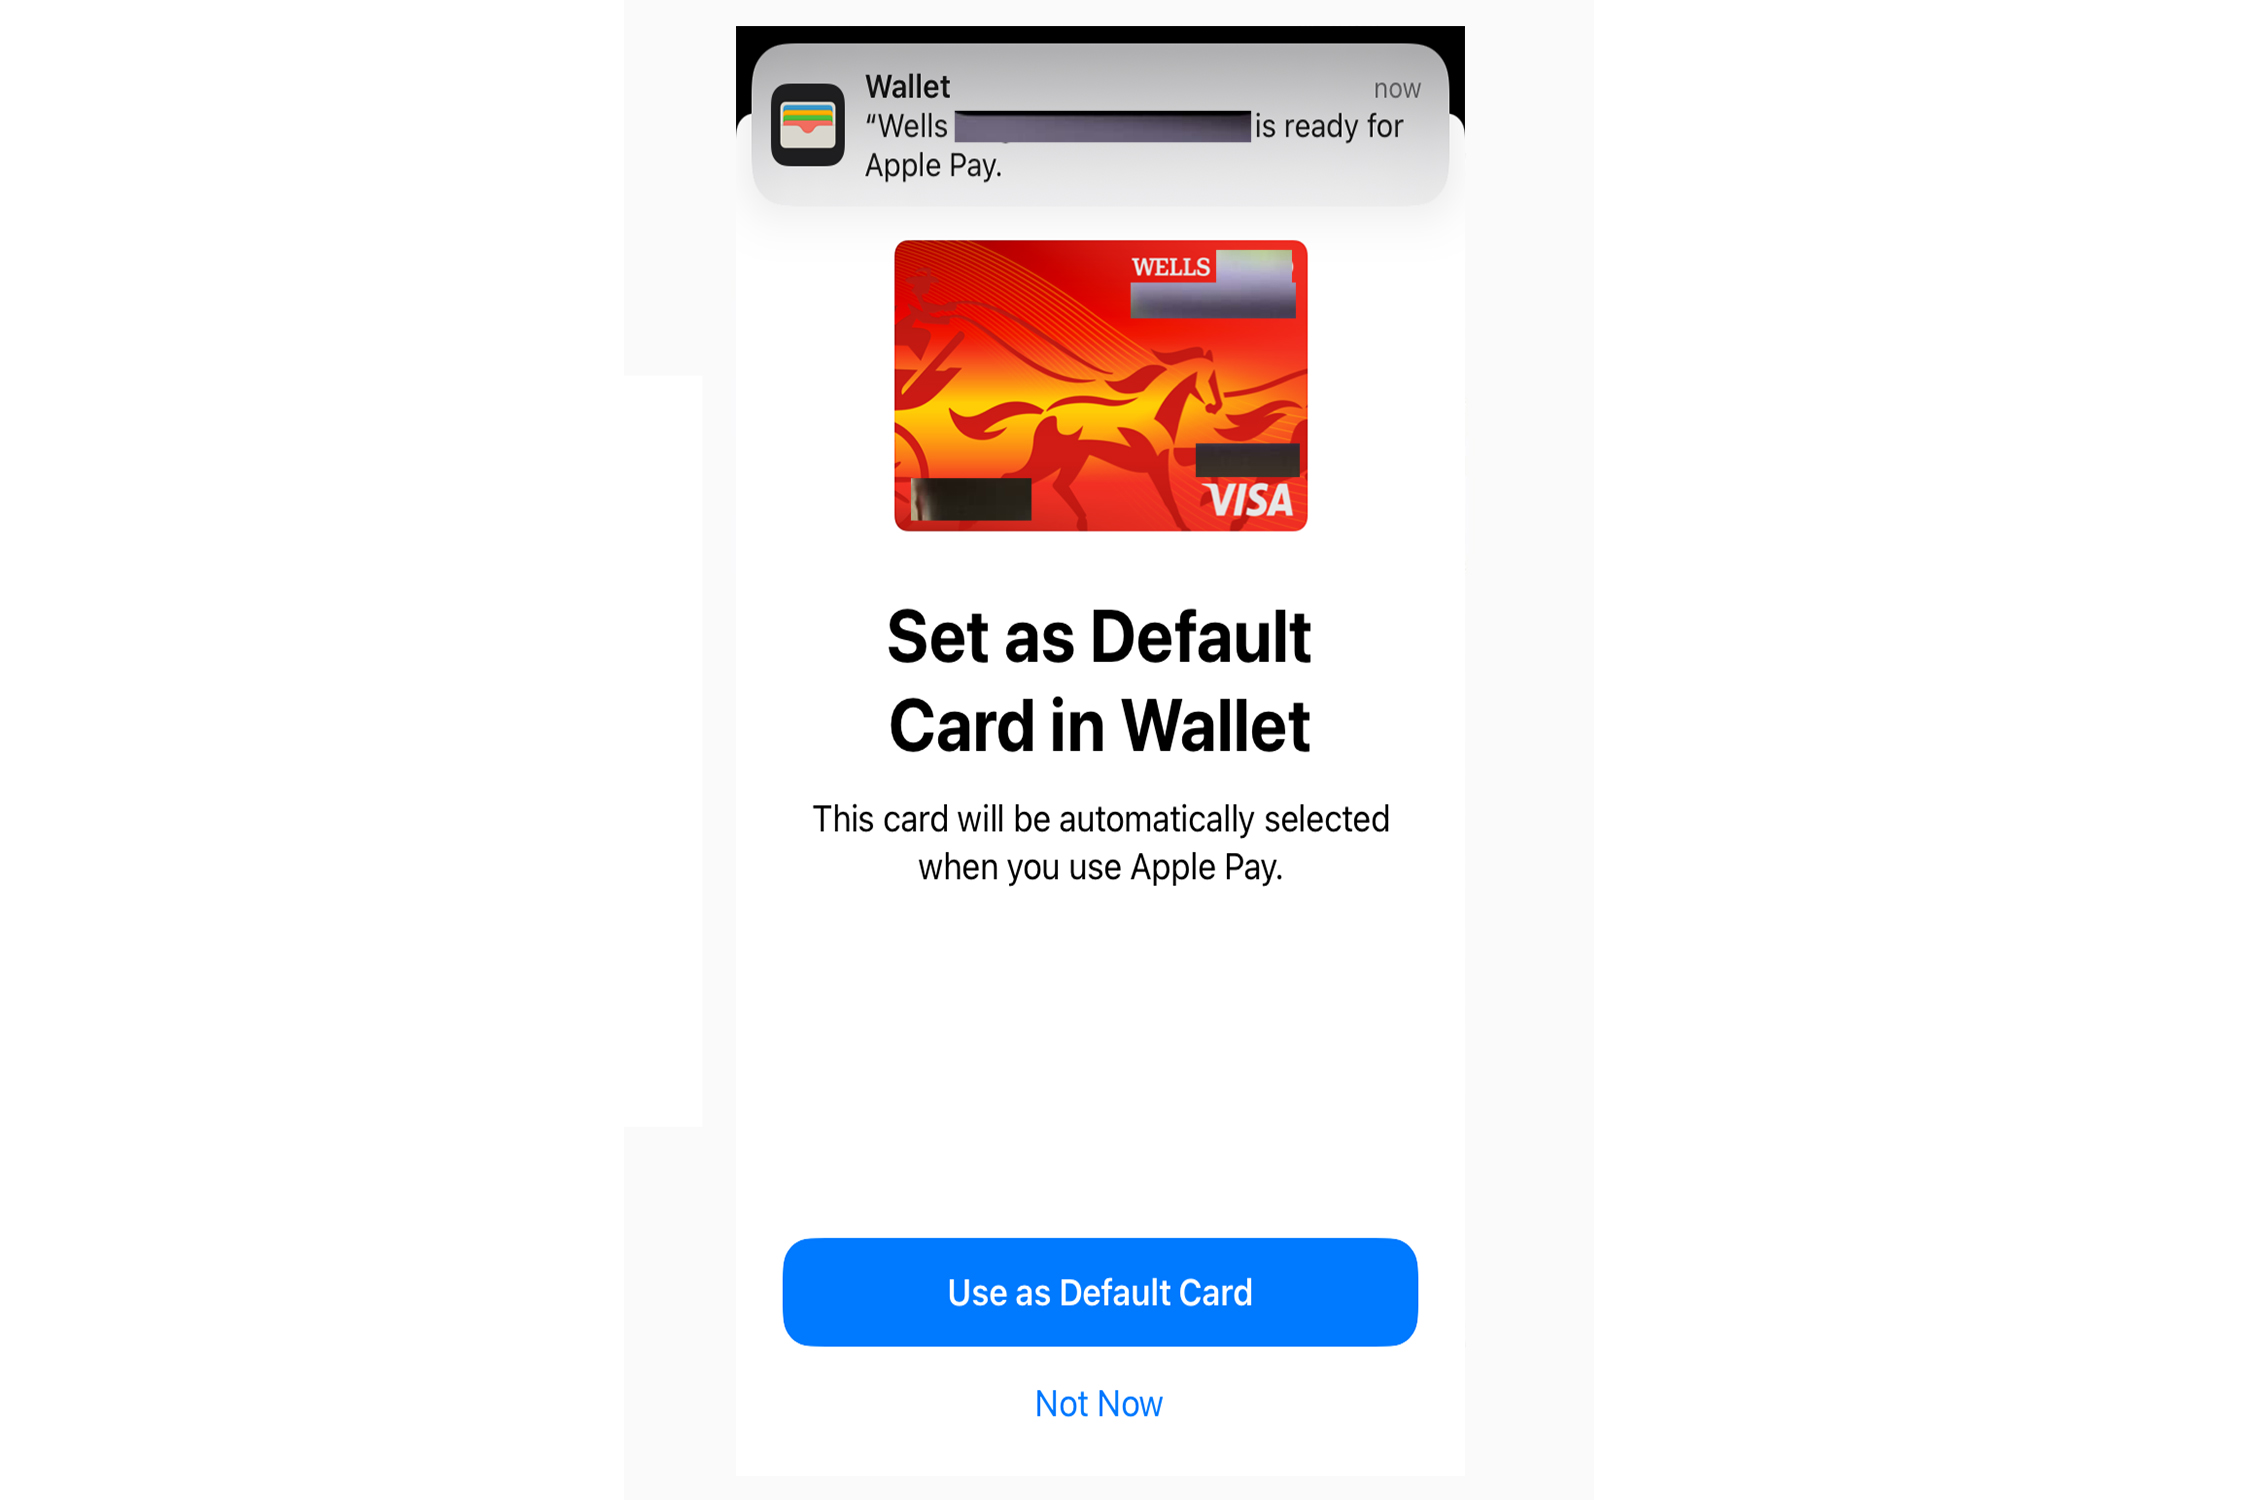 Apple Wallet credit card ready to use notice.